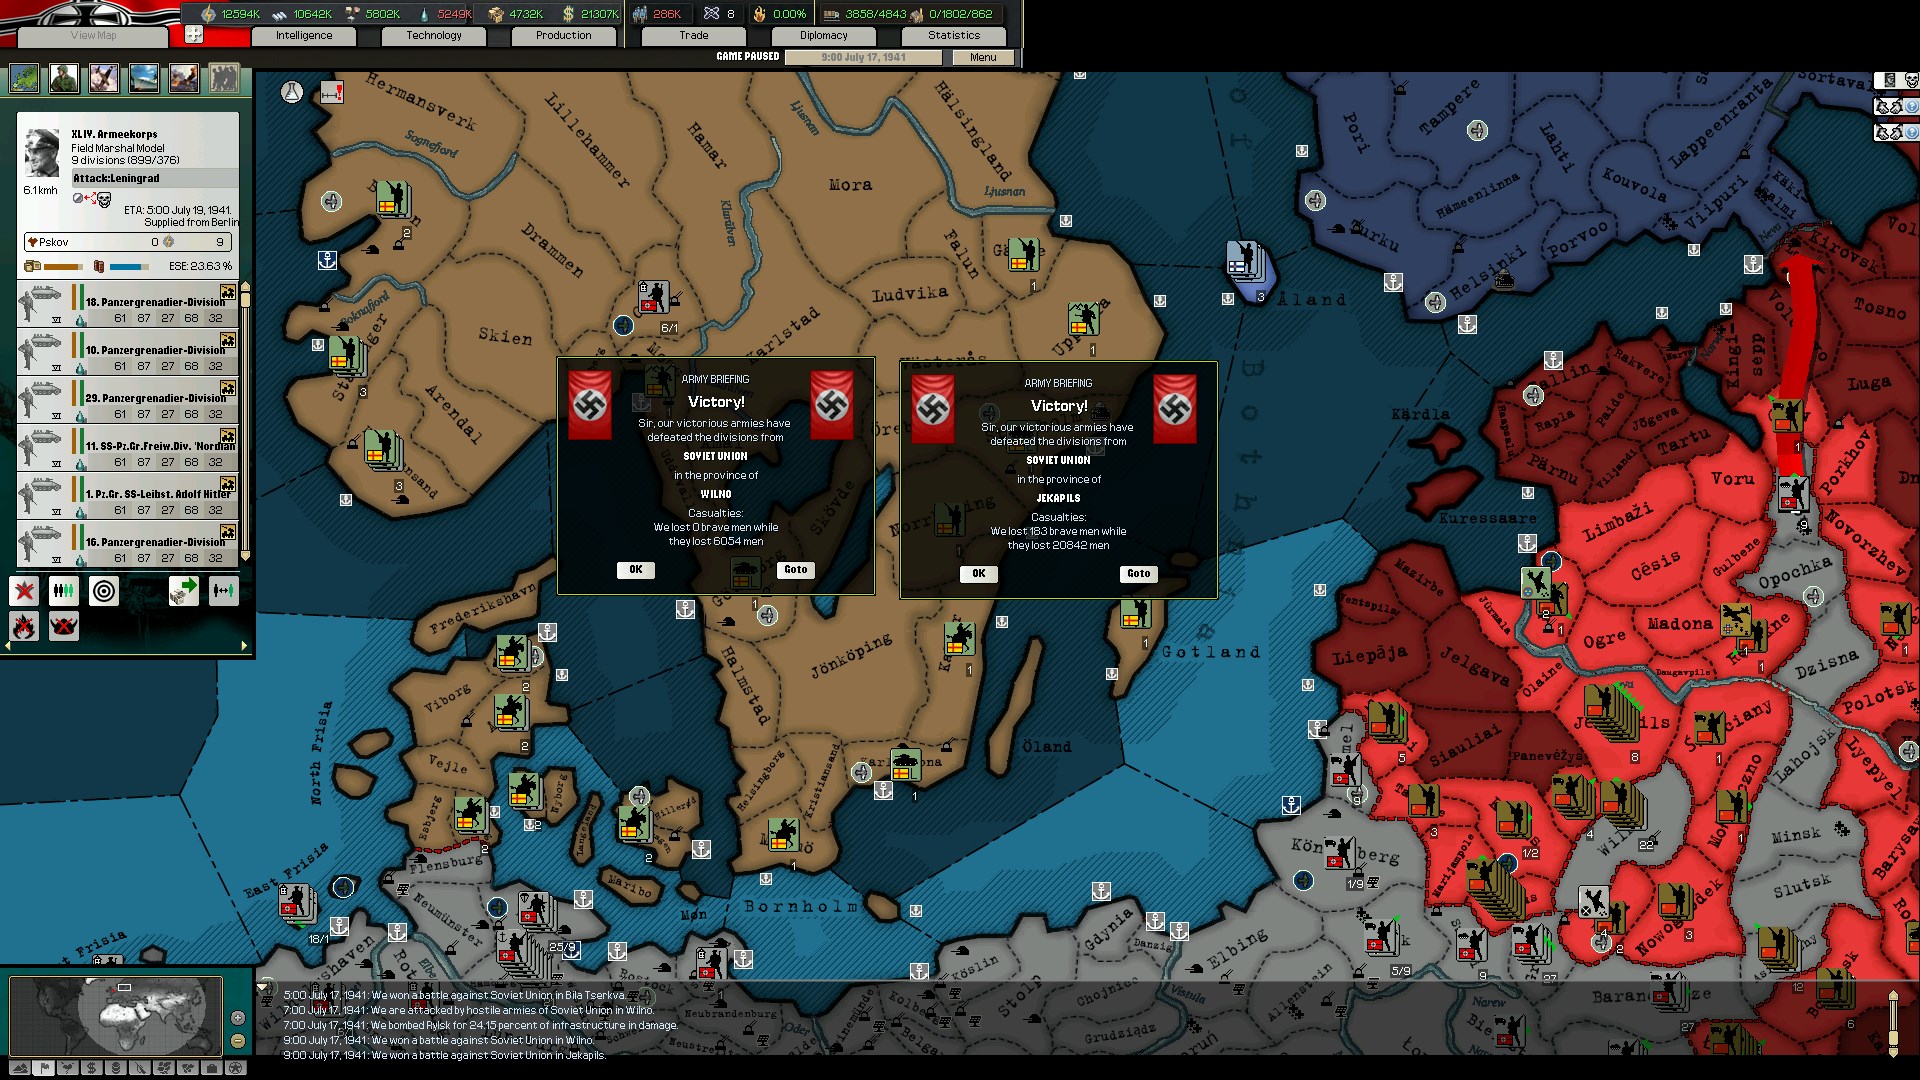 arsenal democracy a hearts of iron game